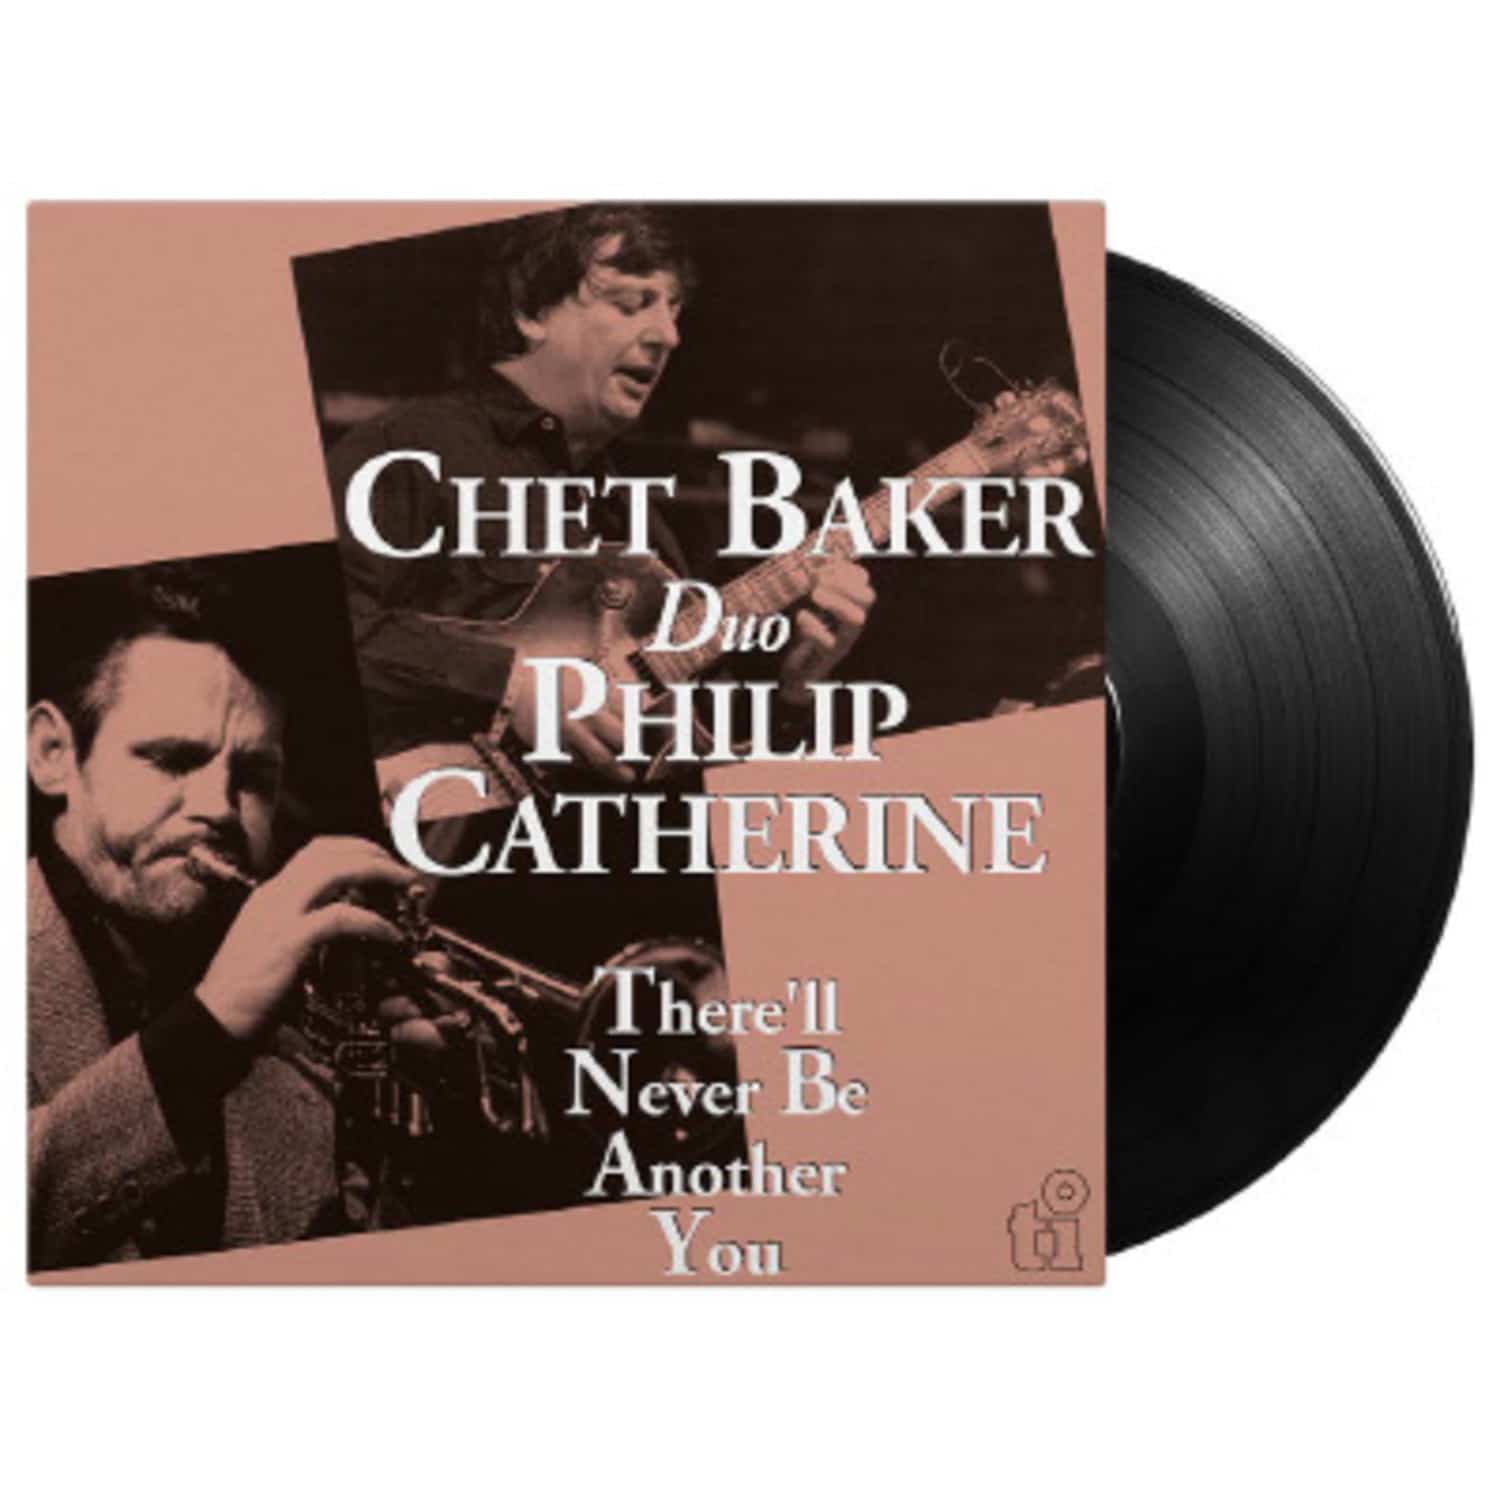 Chet Baker & Philip Catherine - THERE LL NEVER BE ANOTHER YOU 